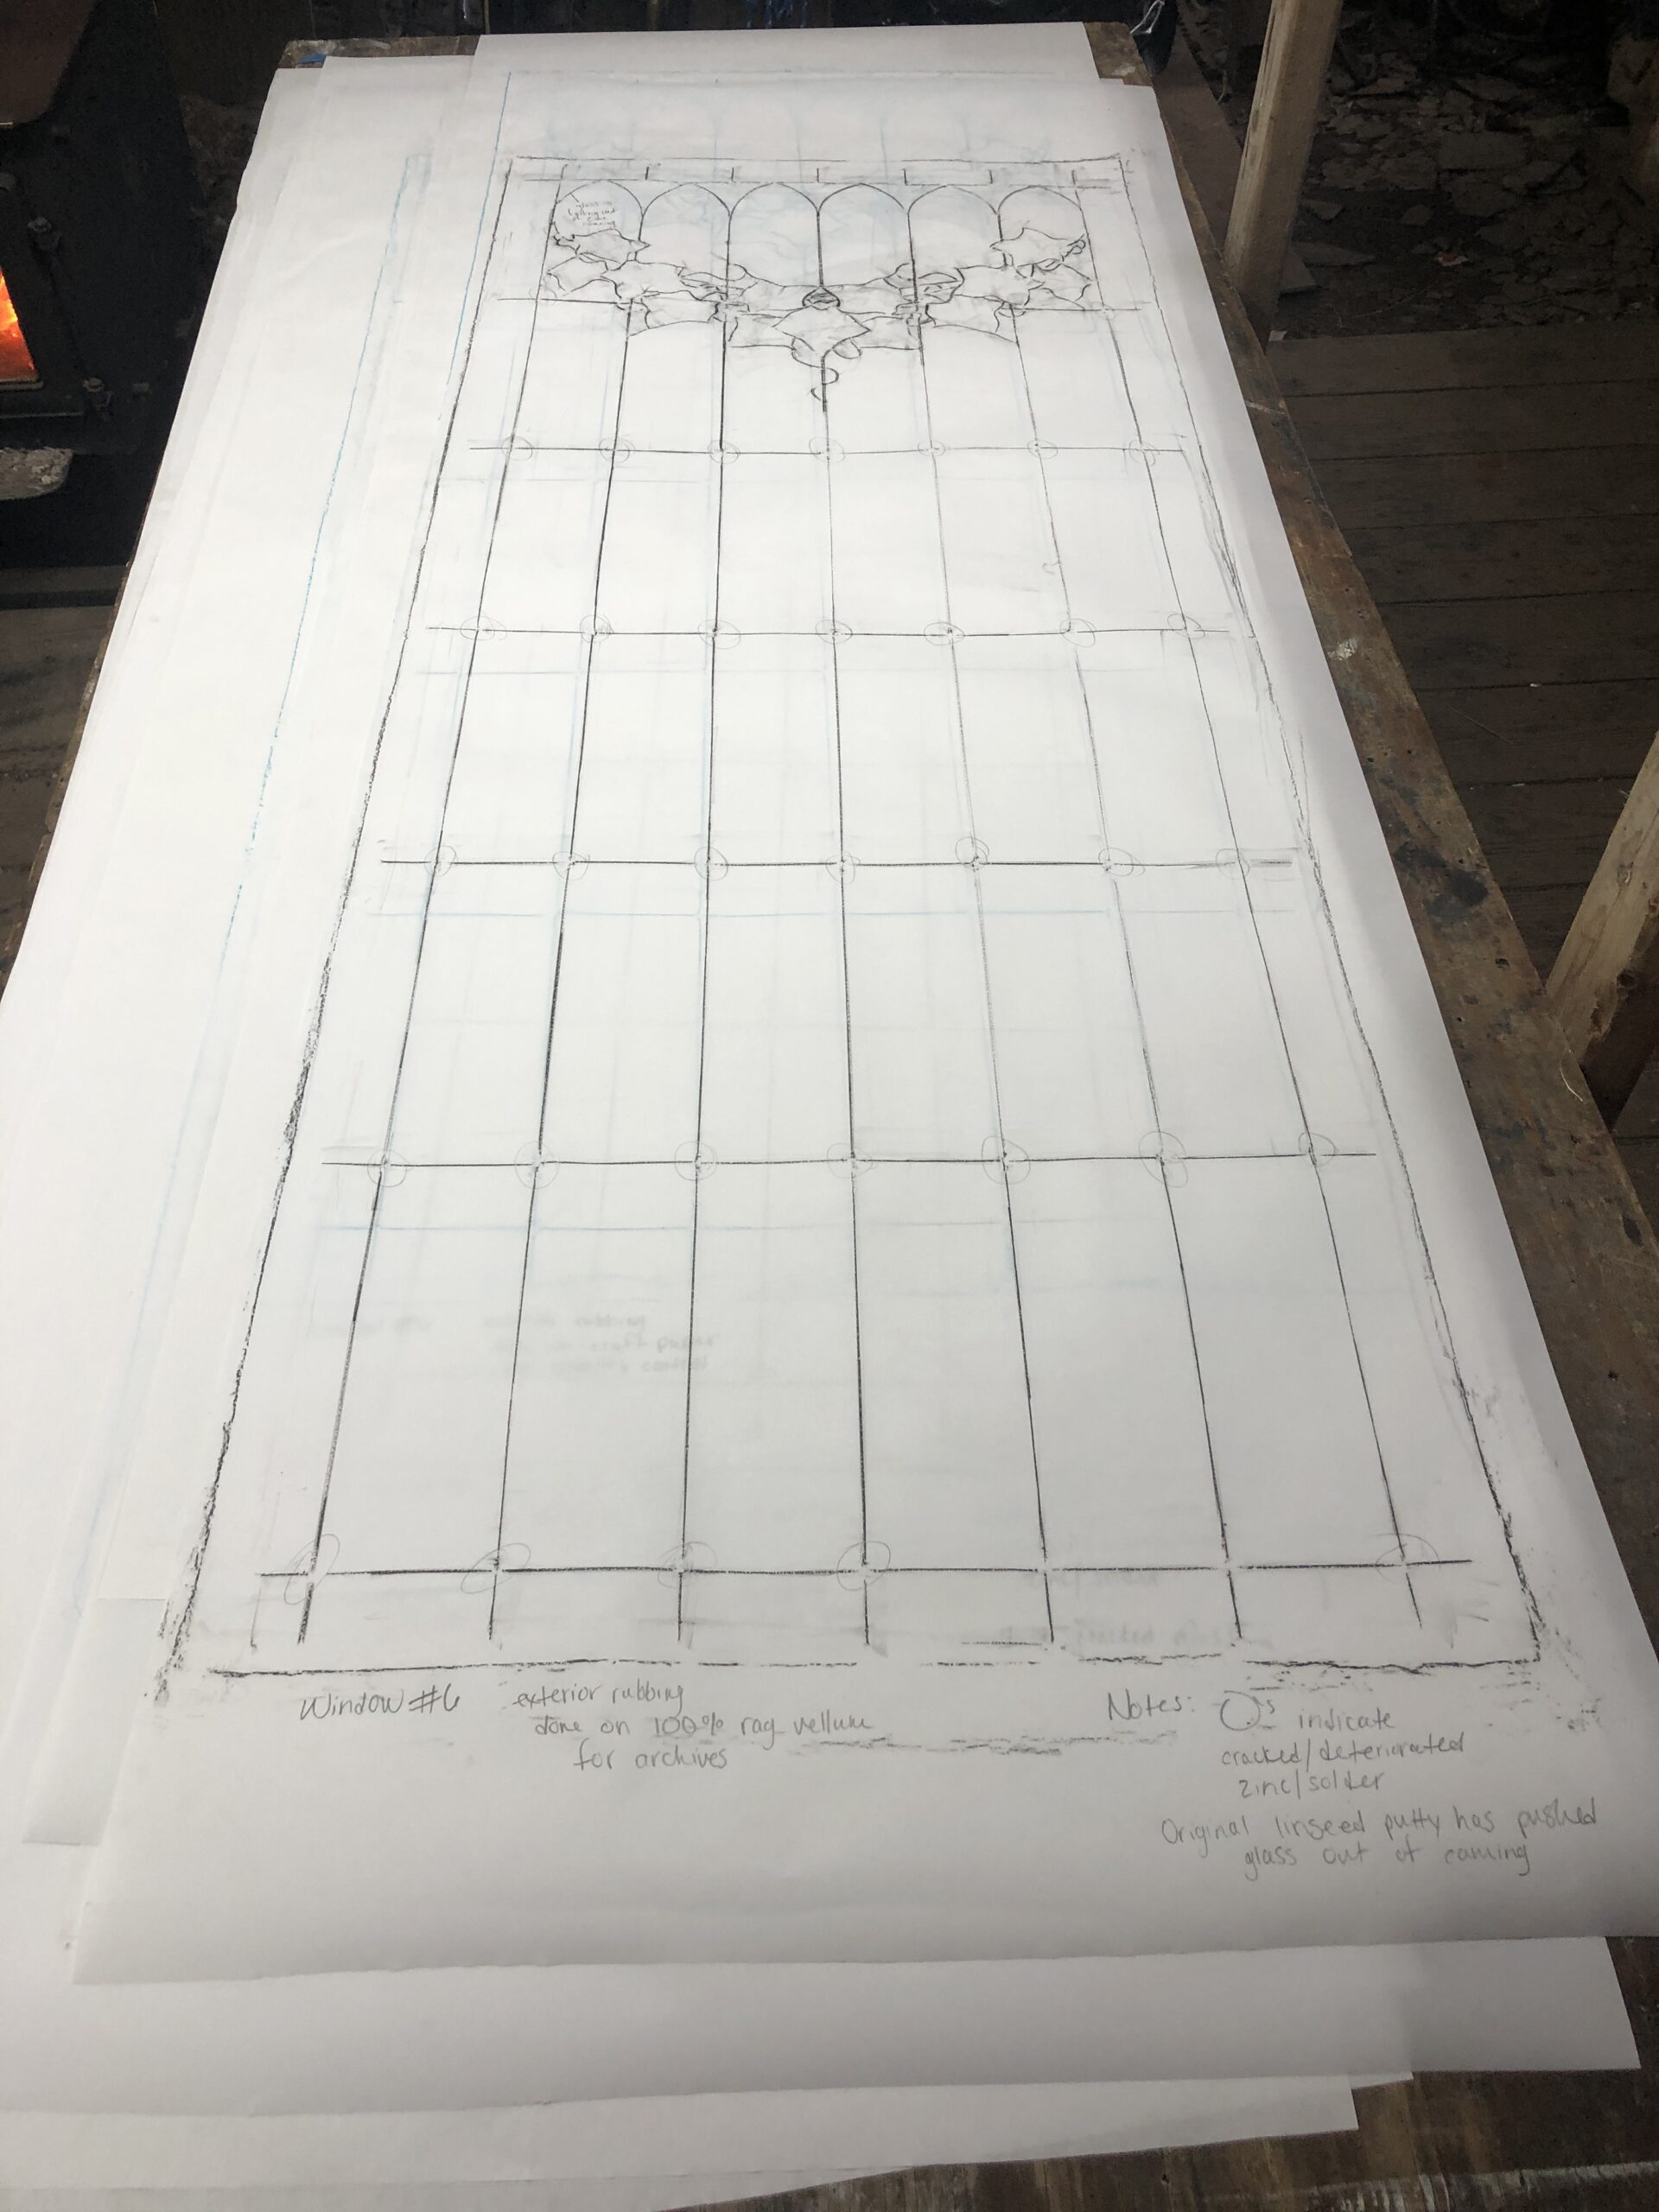 A rag vellum rubbing of one of the windows prior to disassembly.